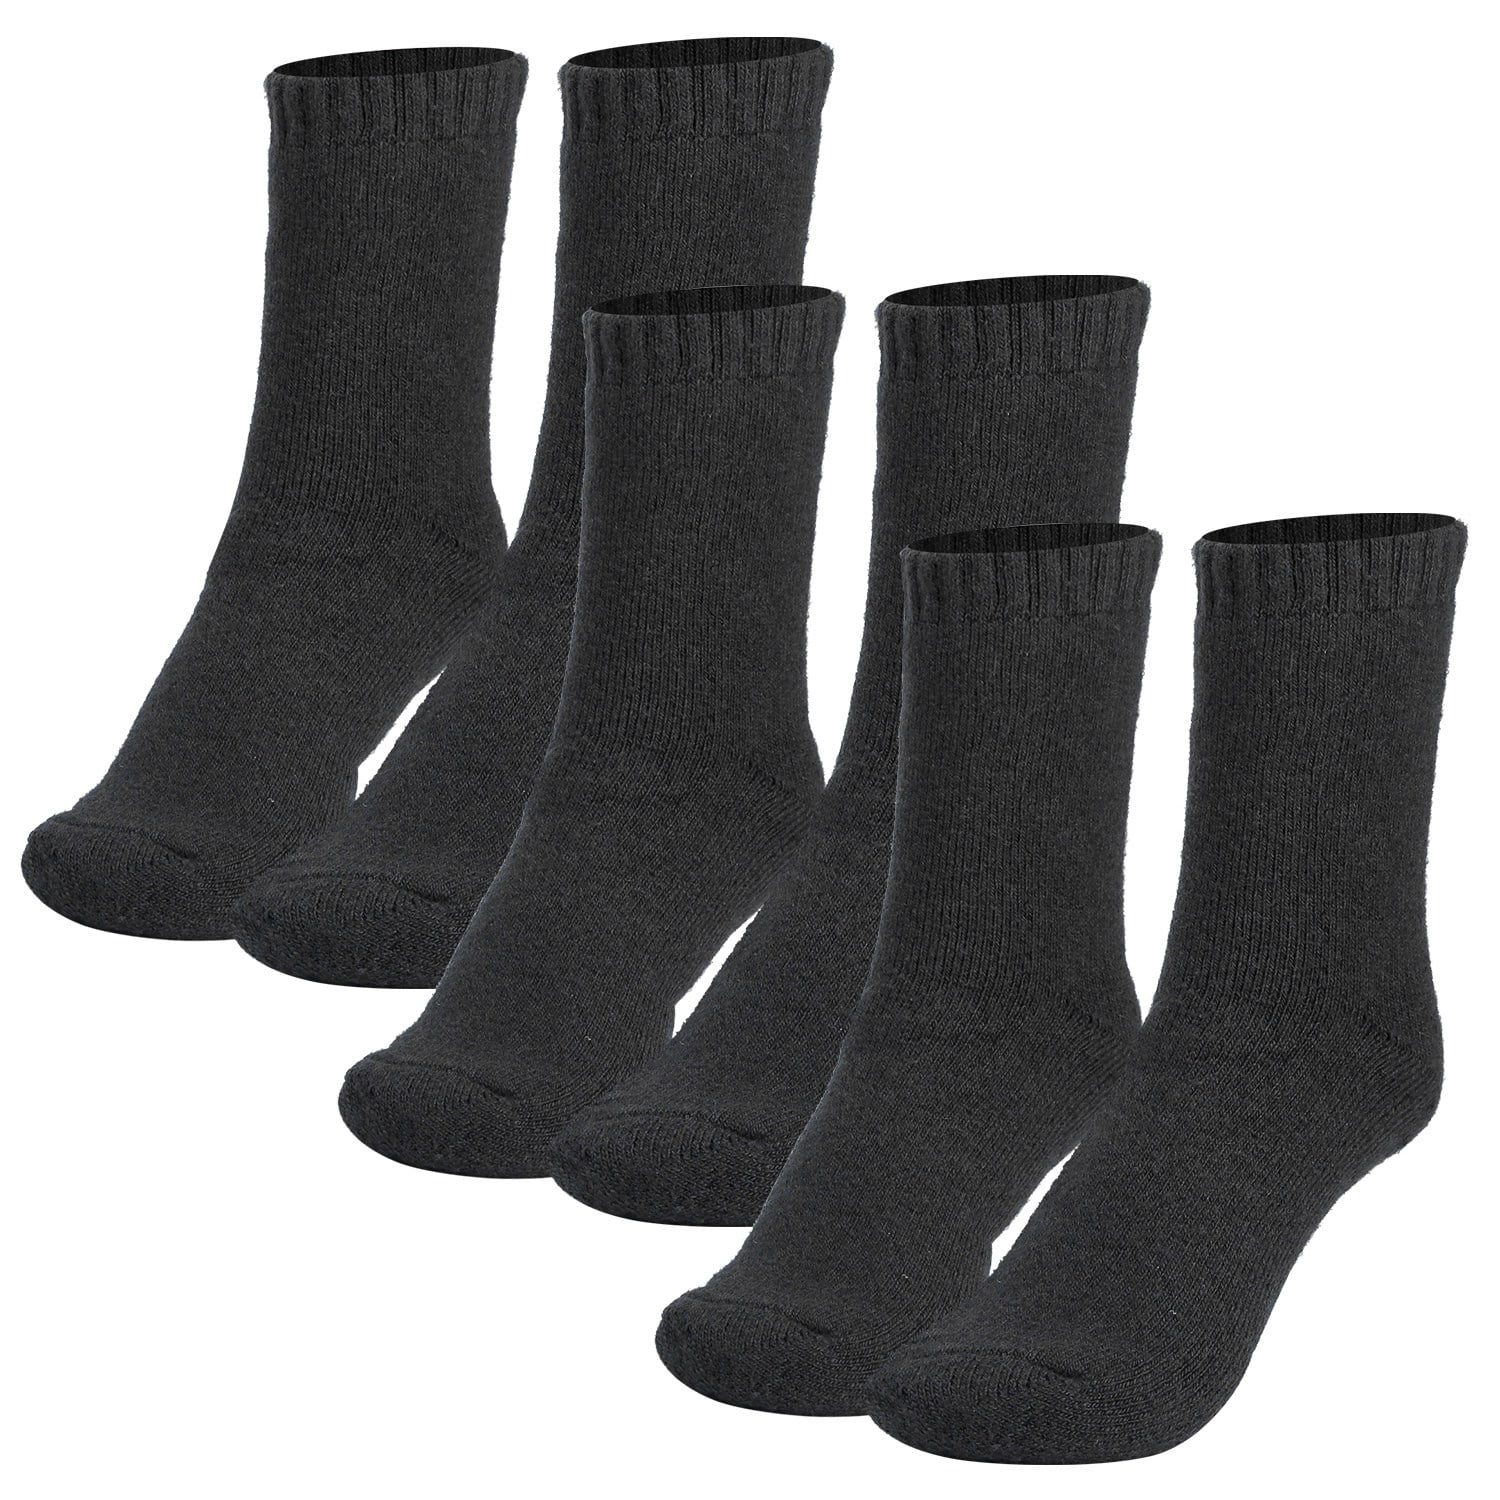 6 Pairs of Mens Luxurious Wool Rich Work Winter Warmer Thermal Socks  Size 6-11 